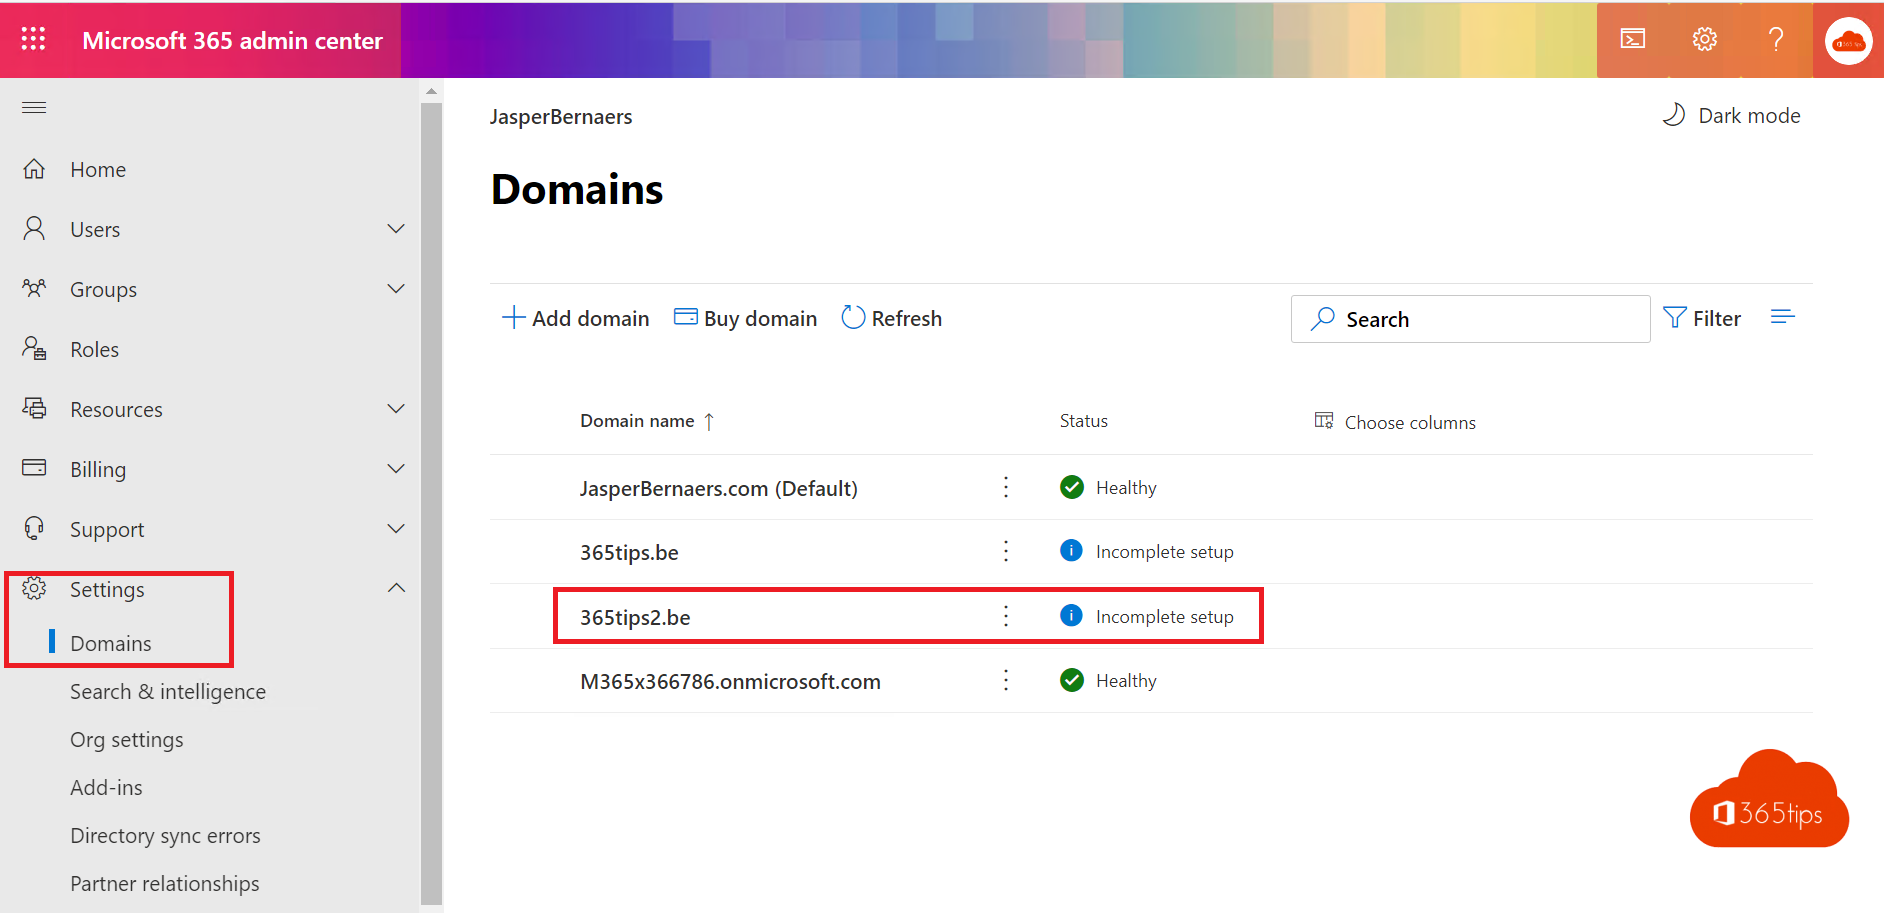 How to add a new e-mail domain to Microsoft 365 via the Admin Center